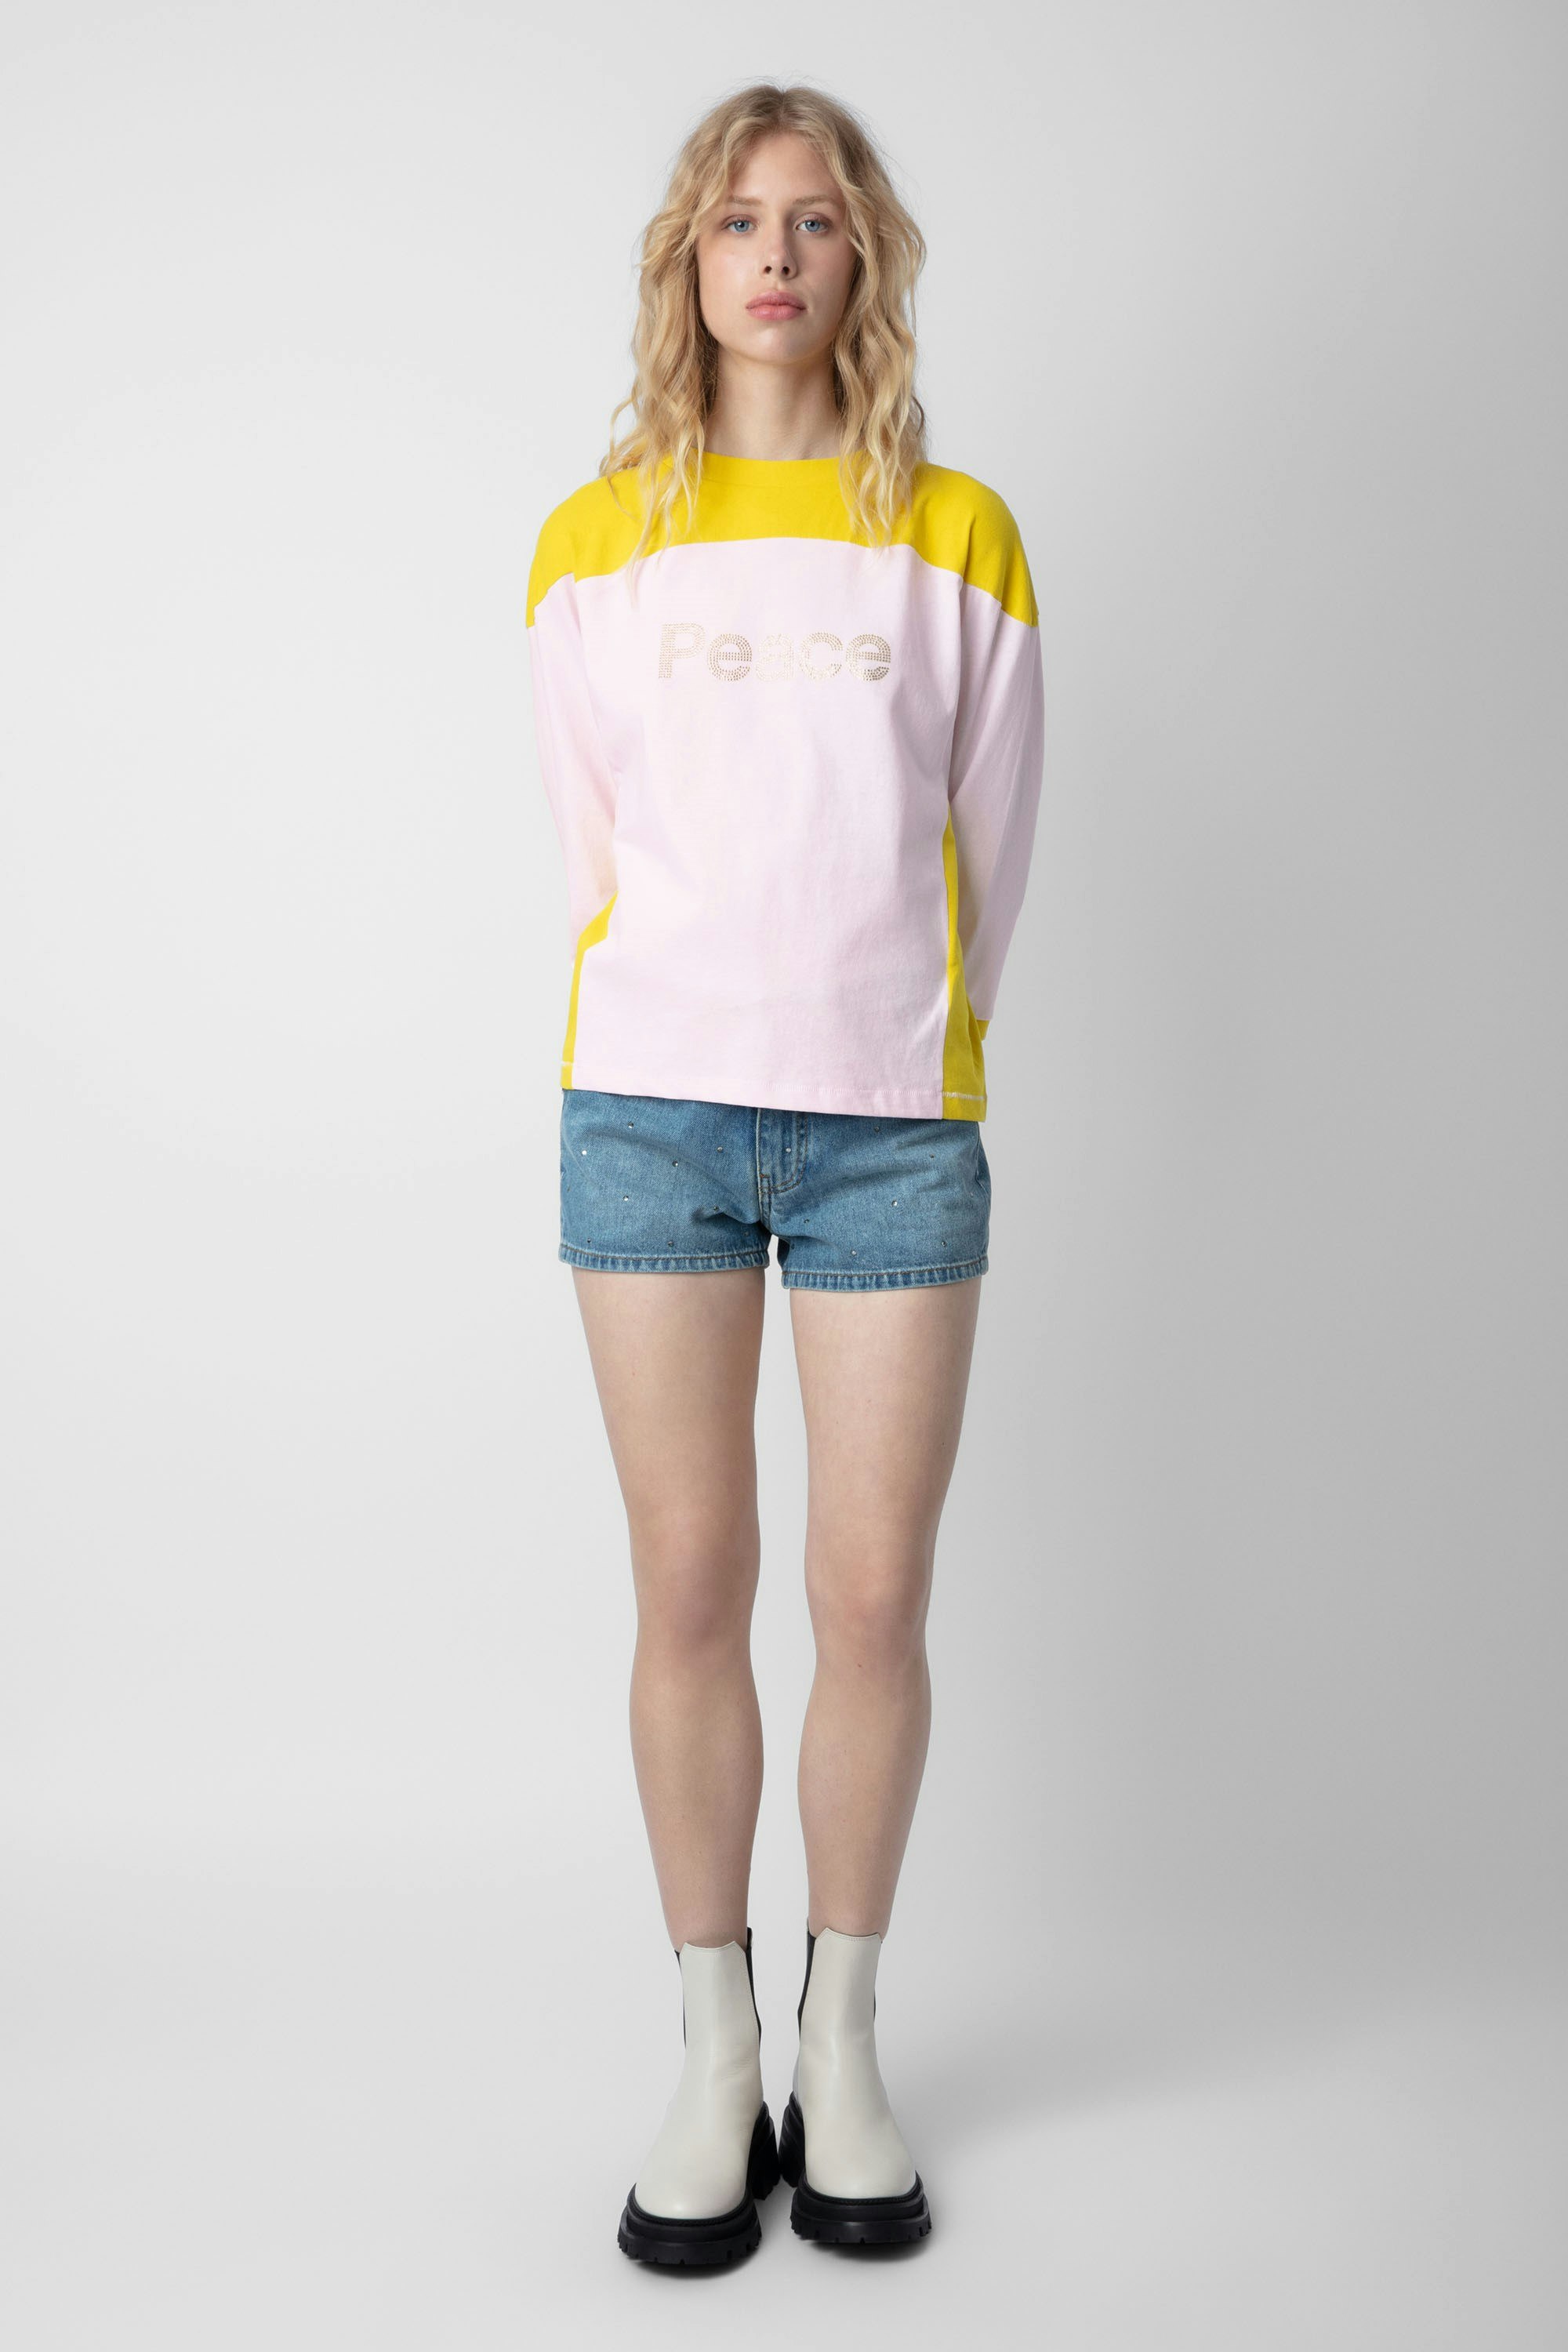 Earl T-Shirt - Women's short-sleeved yellow and ecru cotton T-shirt with contrasting print, peace slogan and diamanté detail.